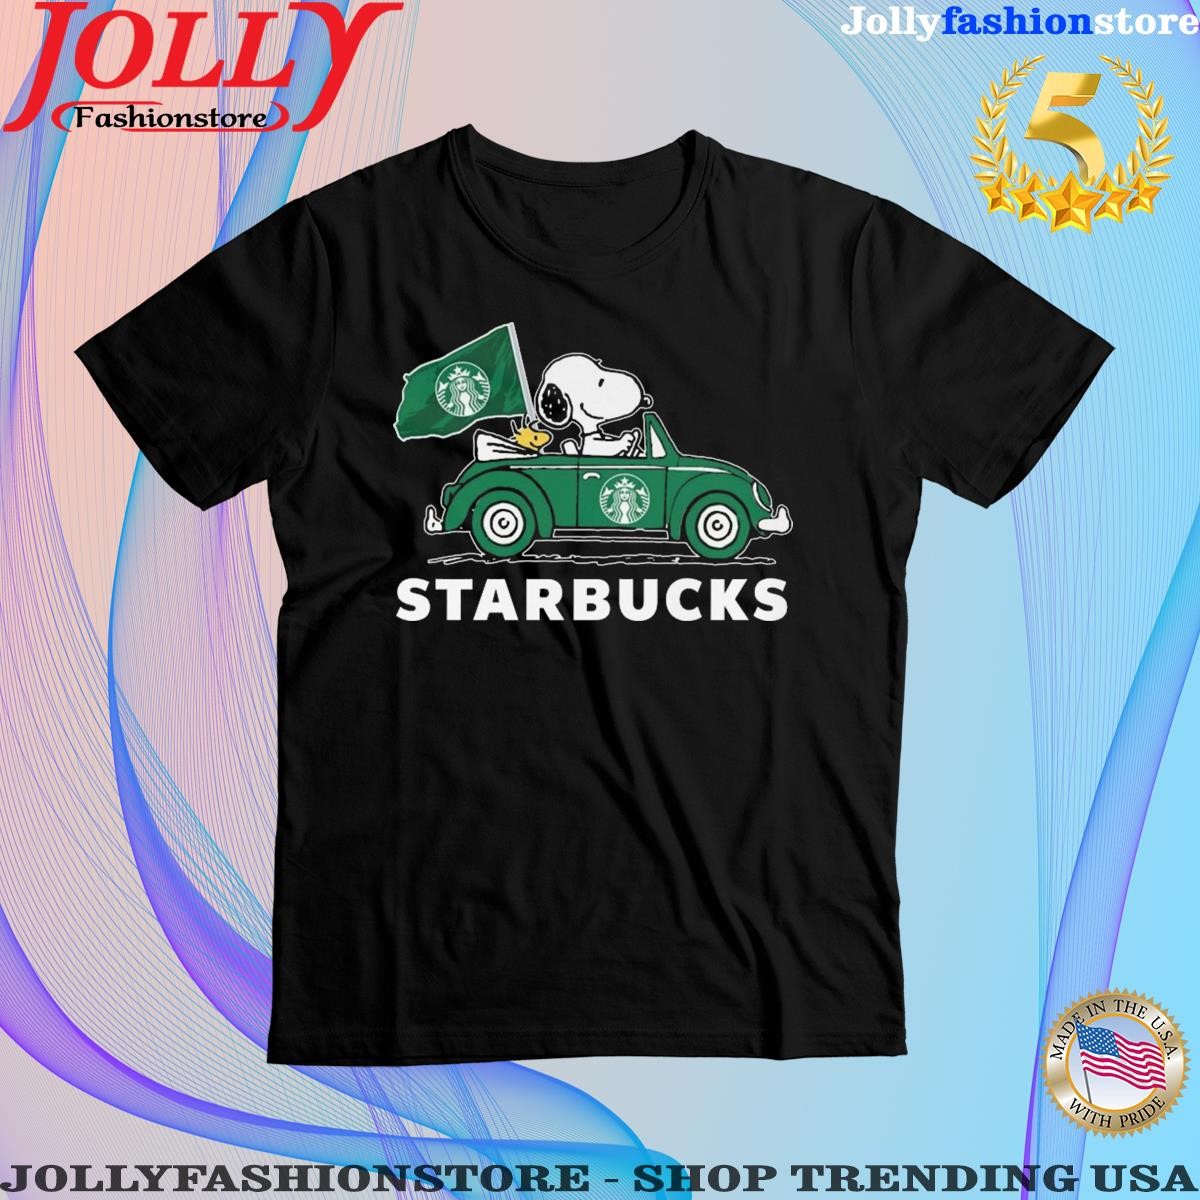 Snoopy and Woodstock riding car starbucks T-shirt